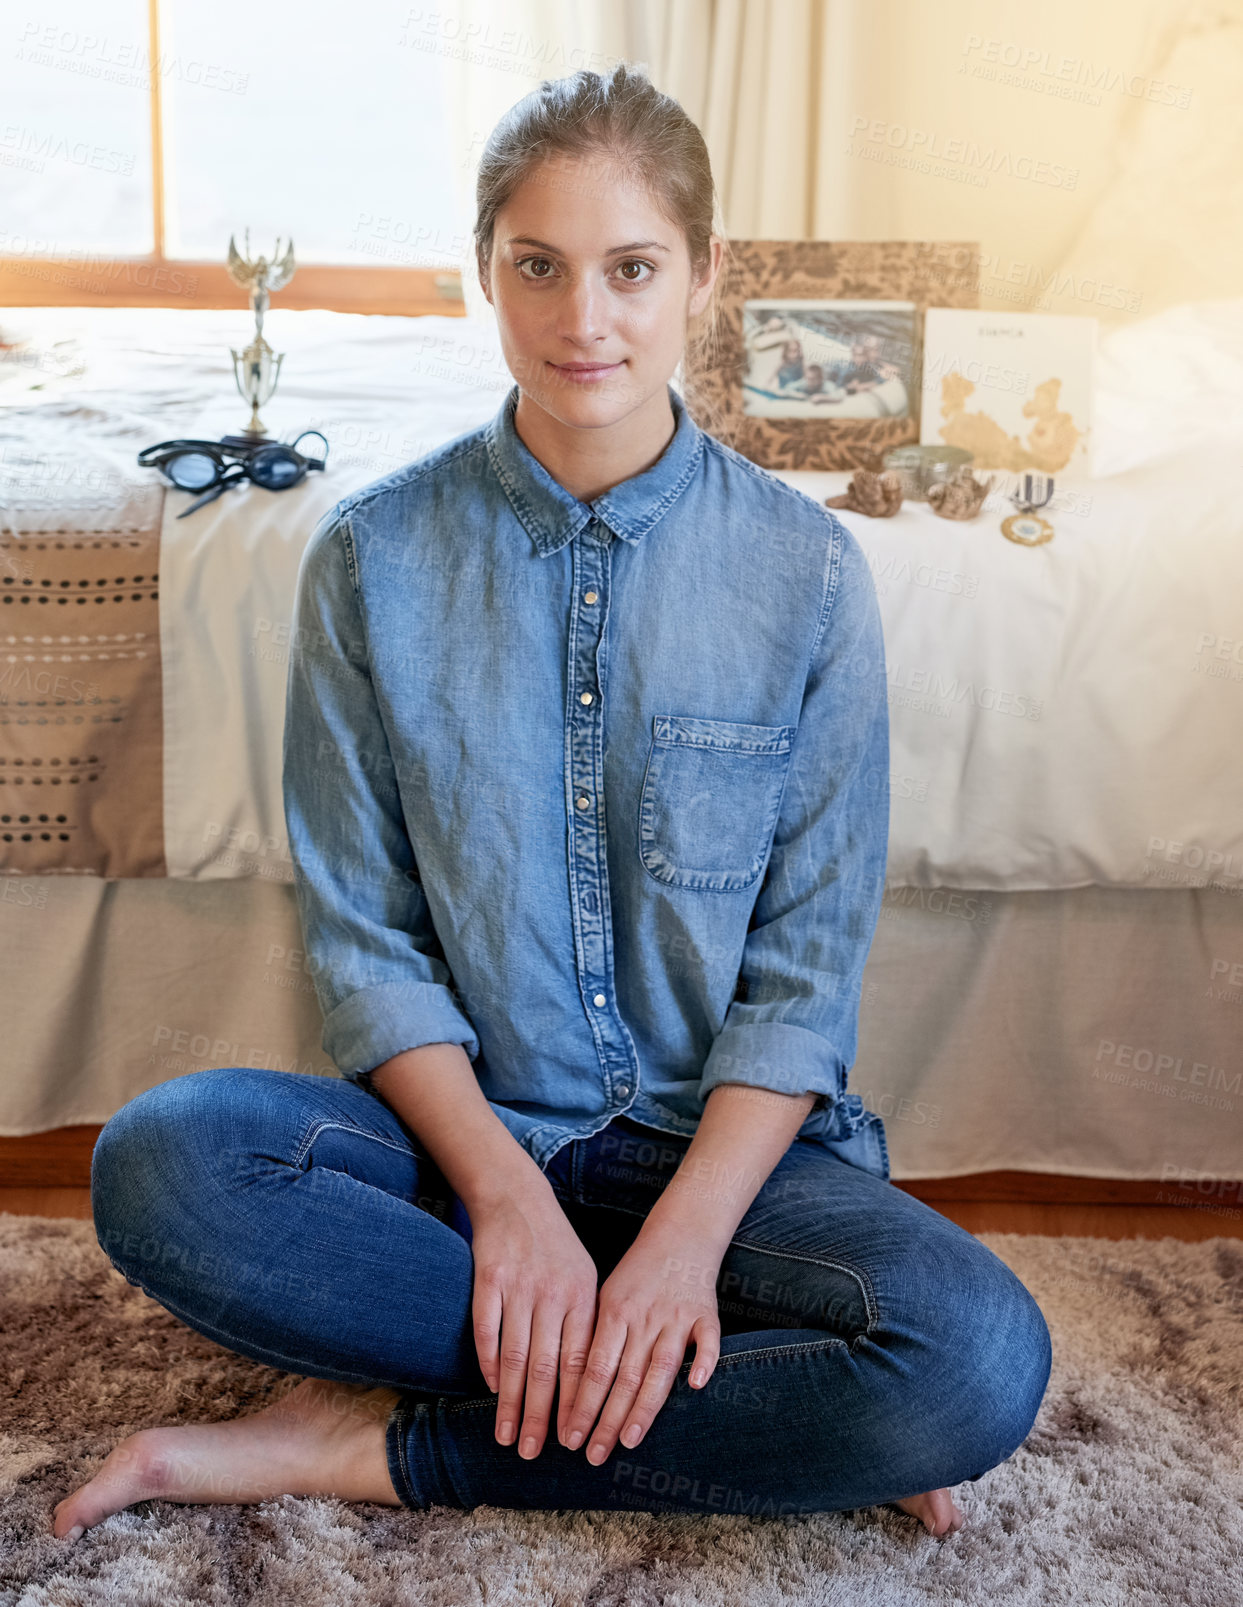 Buy stock photo Portrait of a young woman sitting on her bedroom floor with memorabilia arranged on the bed behind her